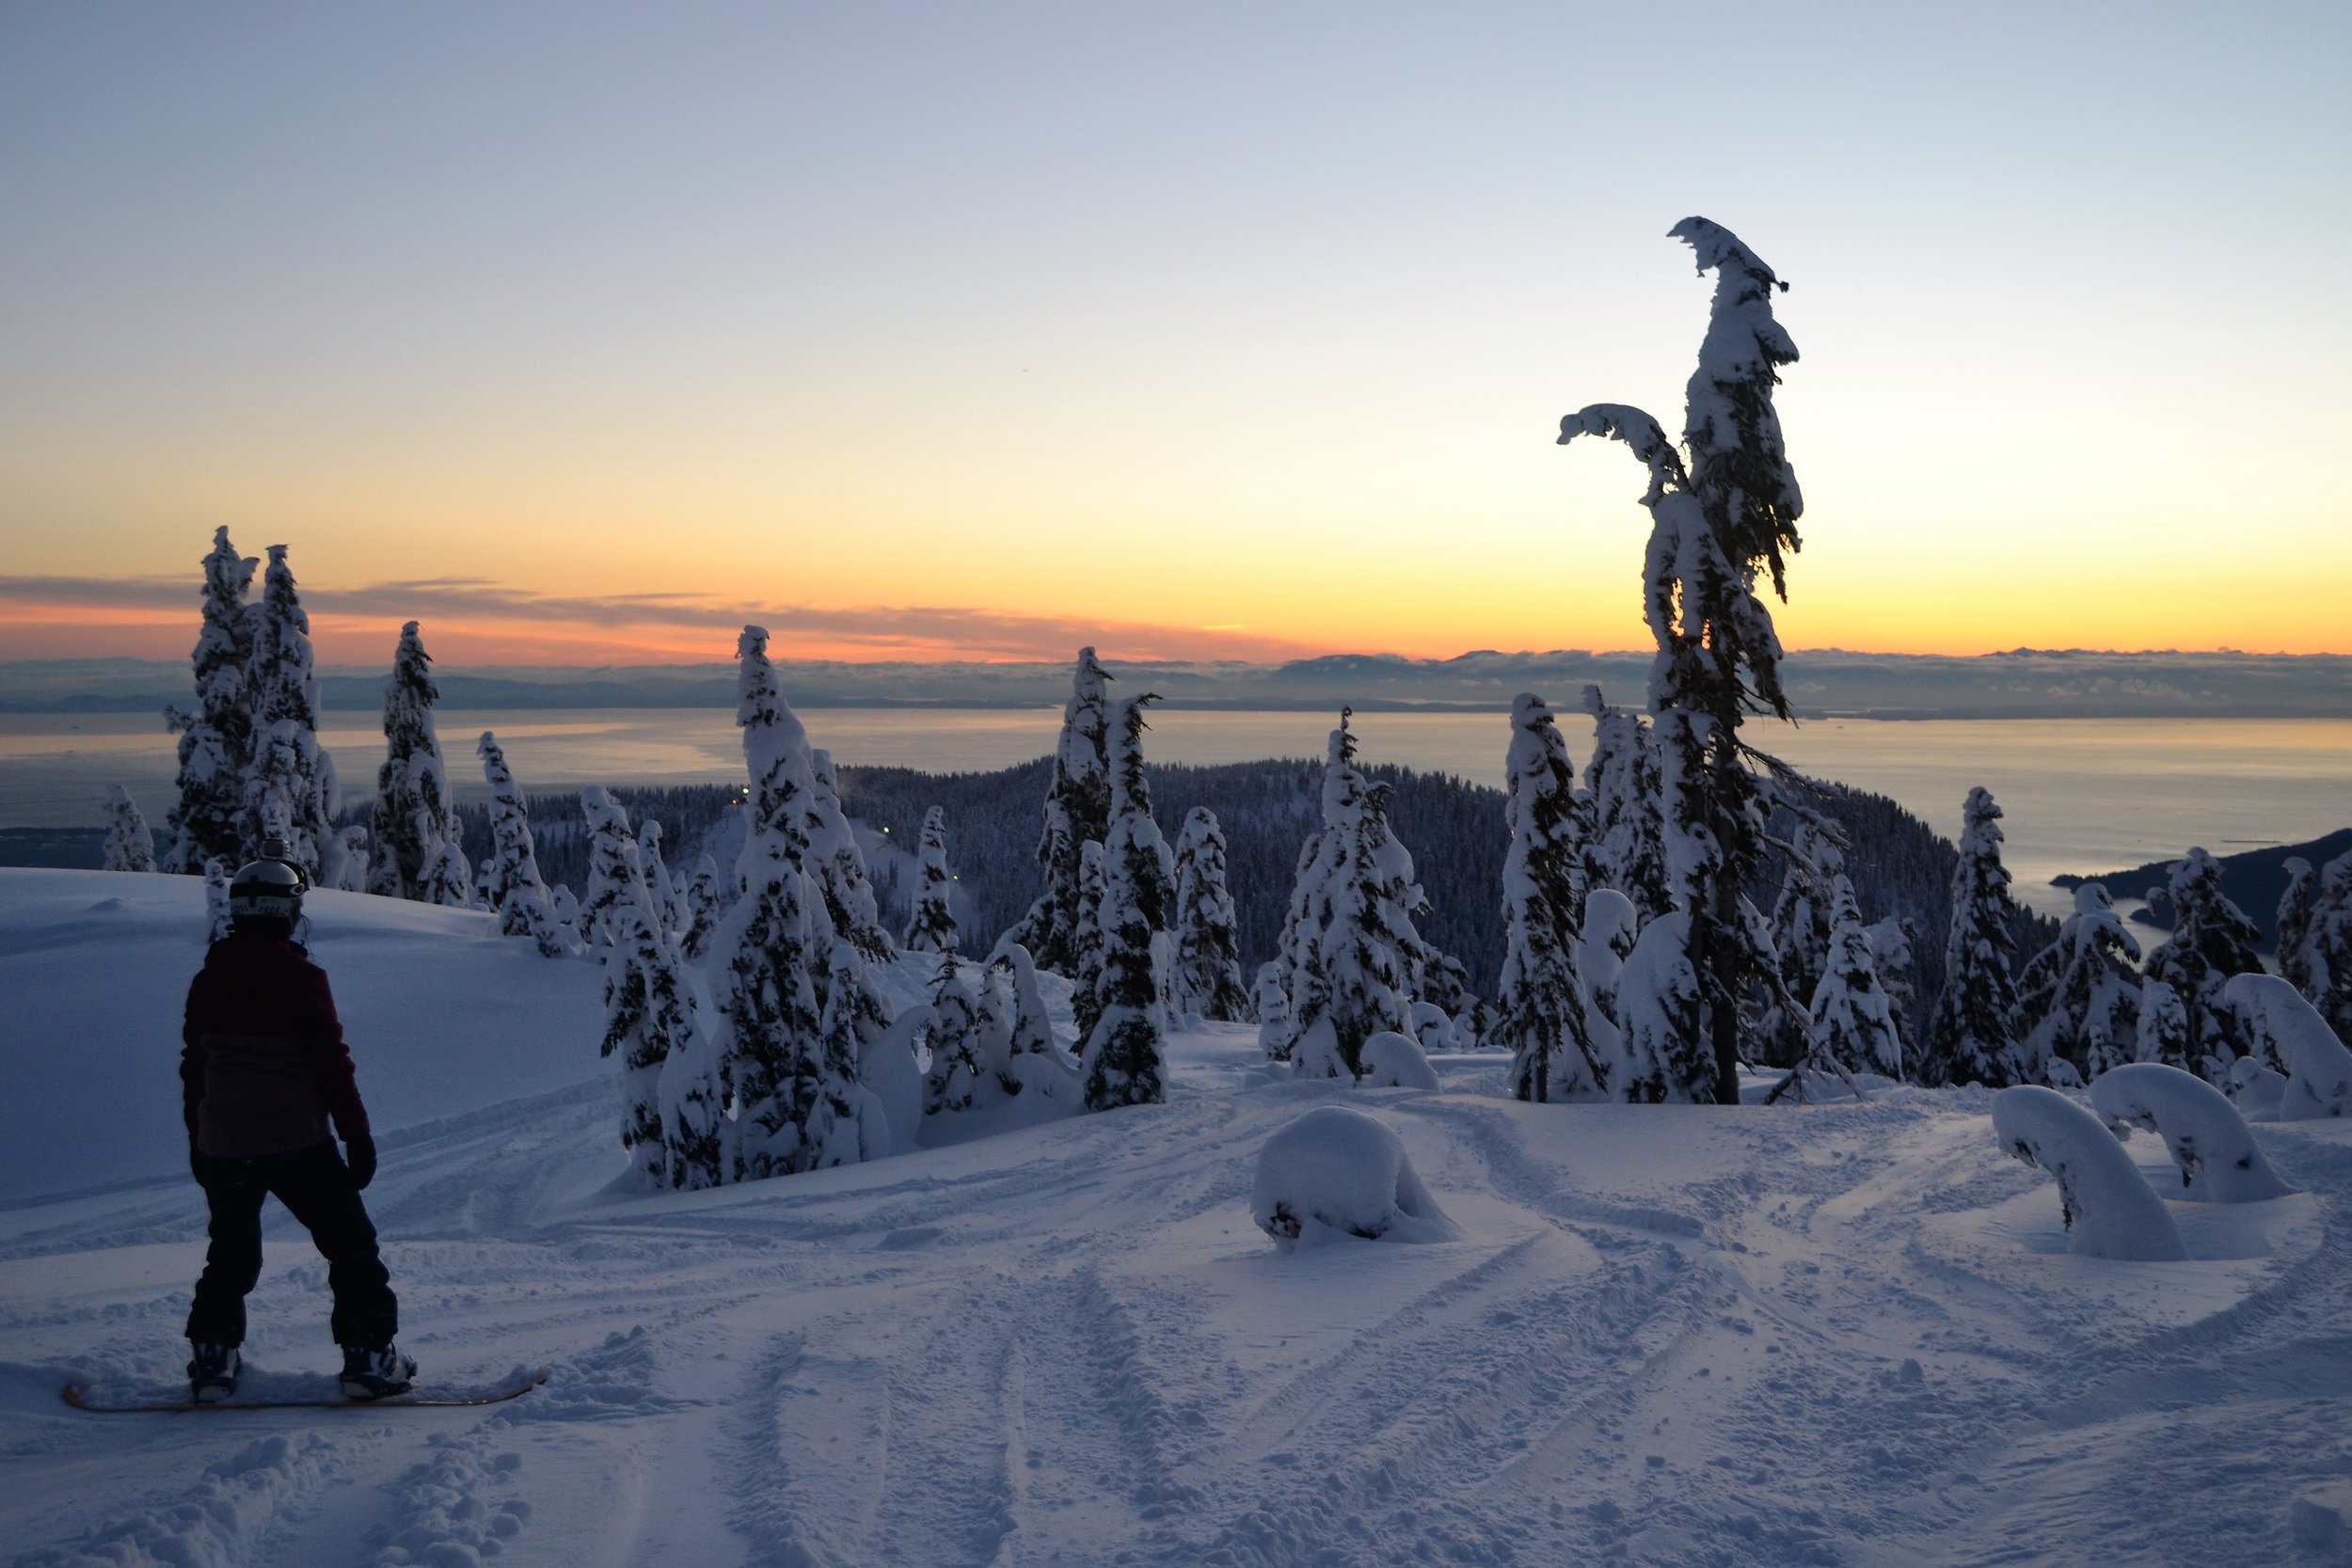 Snowboarder overlooking the ocean in Vancouver during sunset